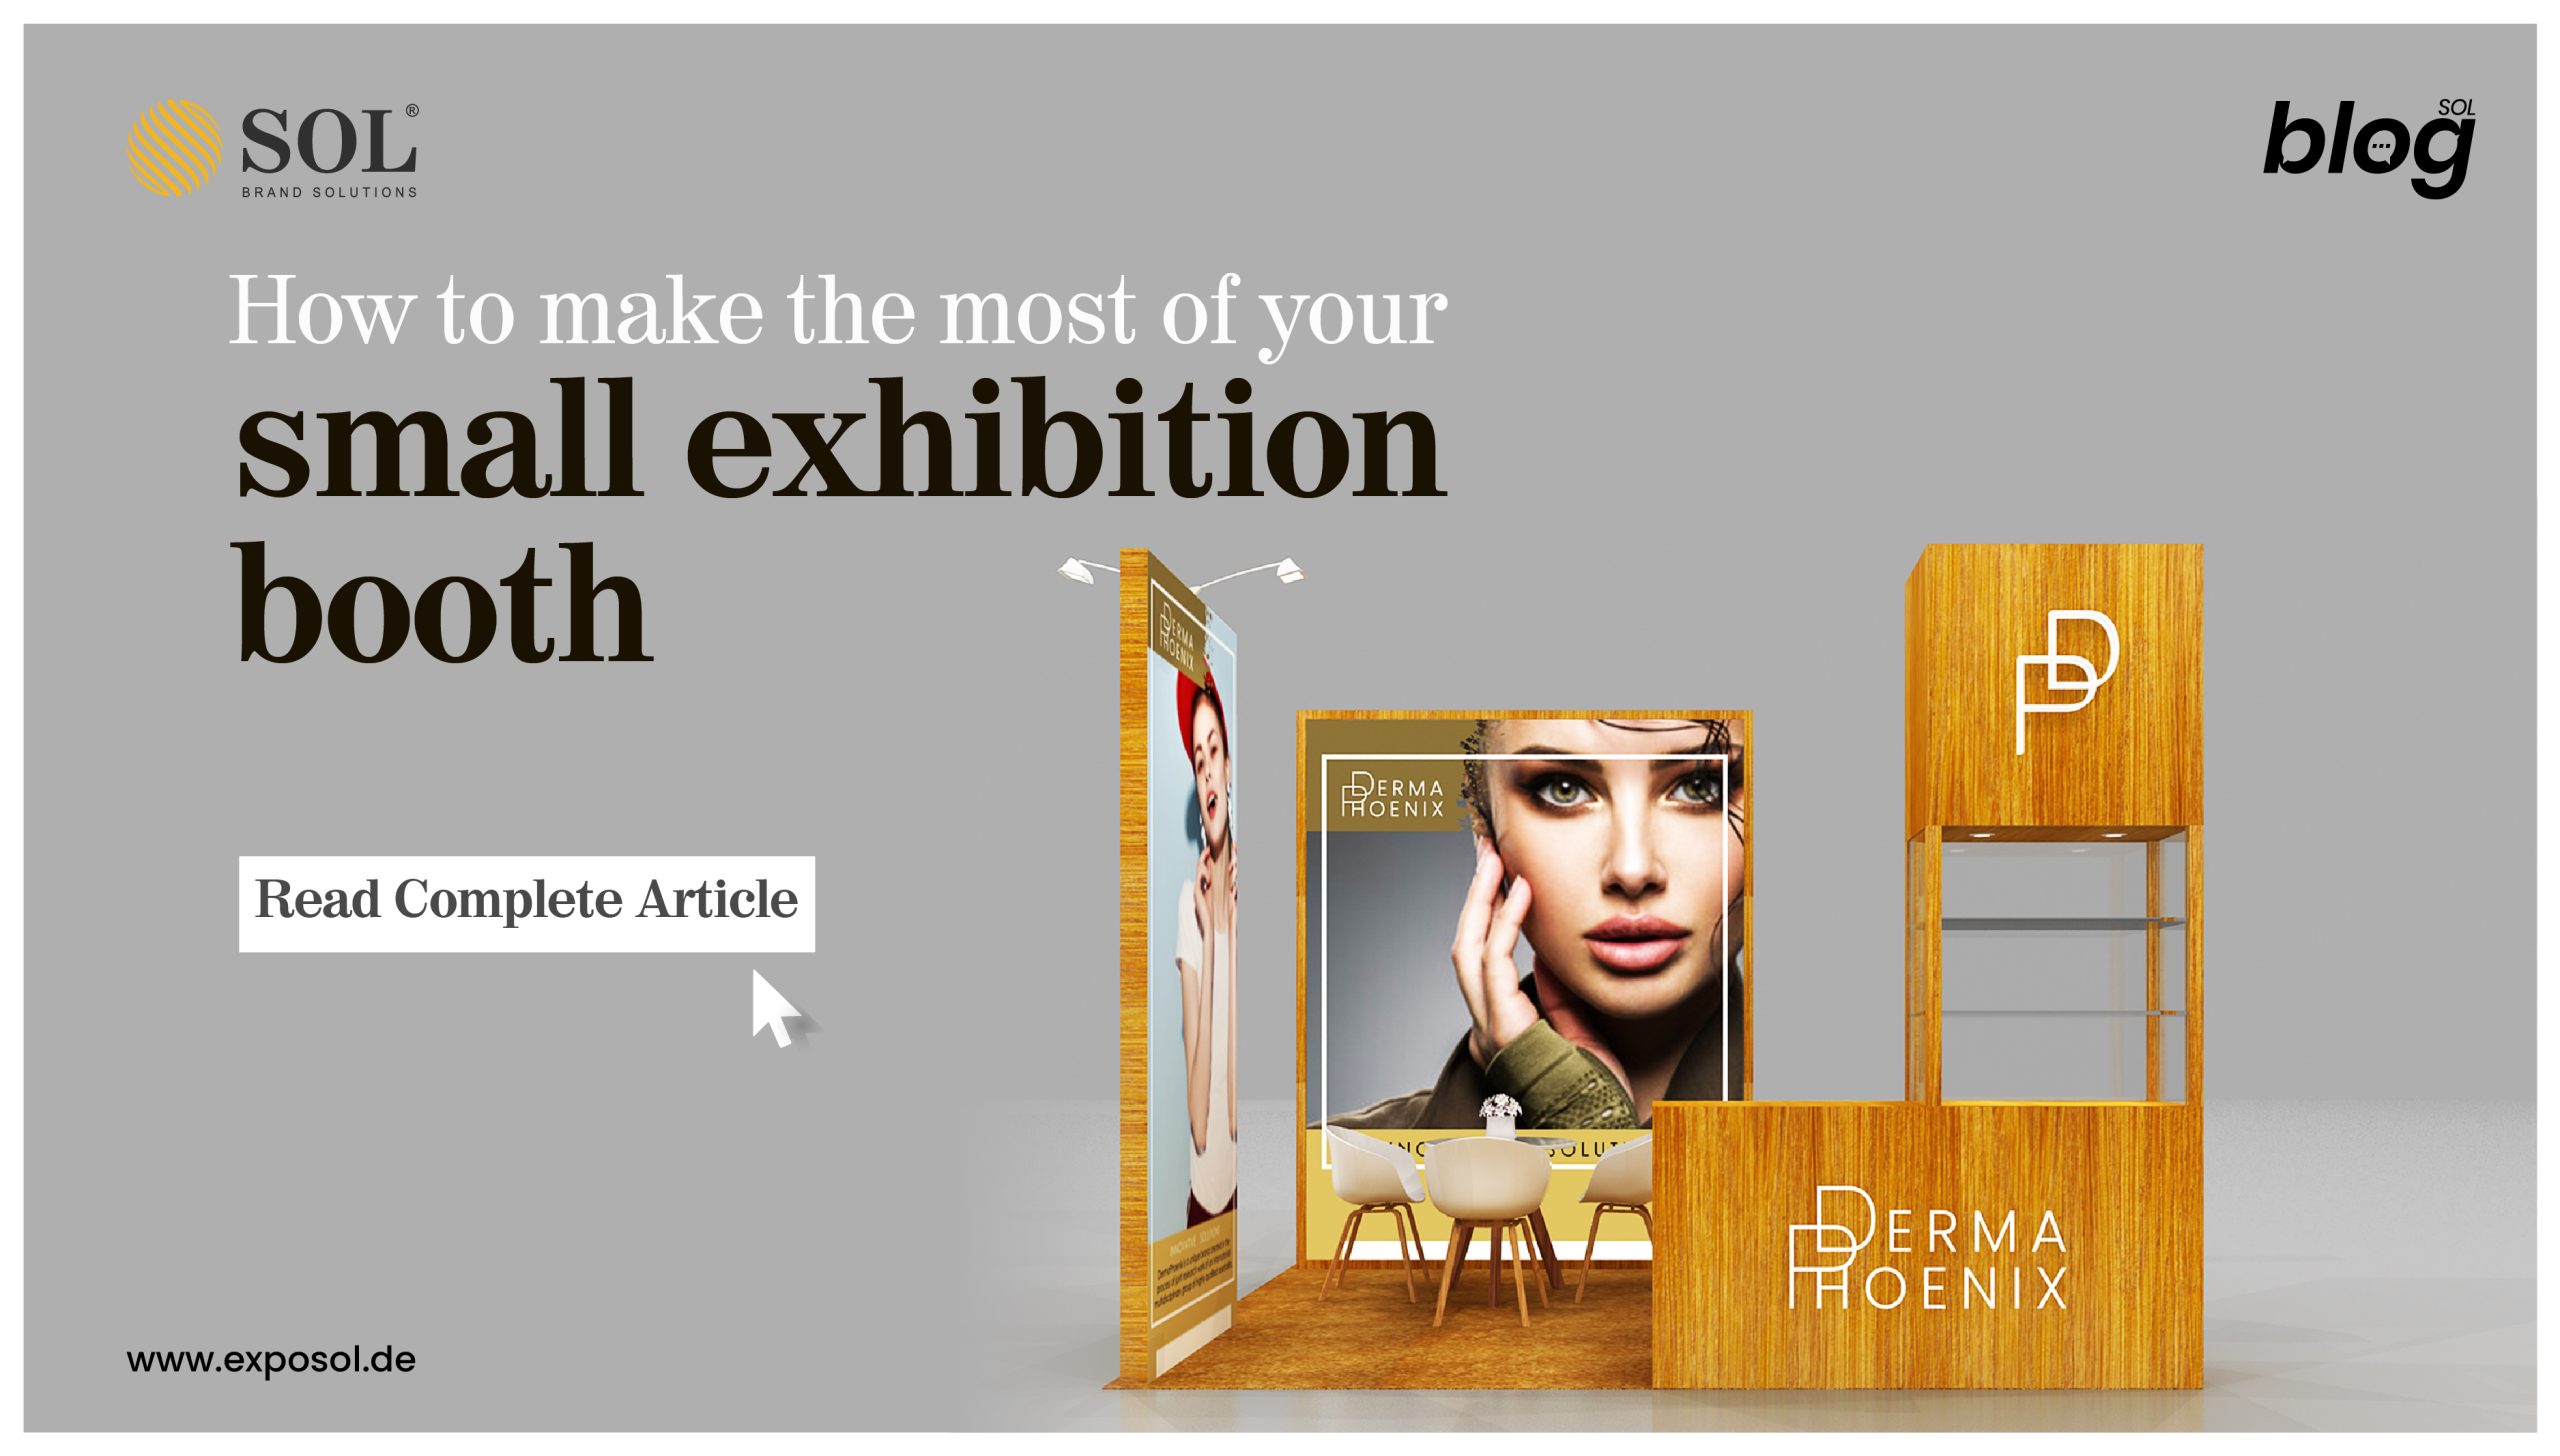 HOW TO MAKE THE MOST OF YOUR SMALL EXHIBITION BOOTH?